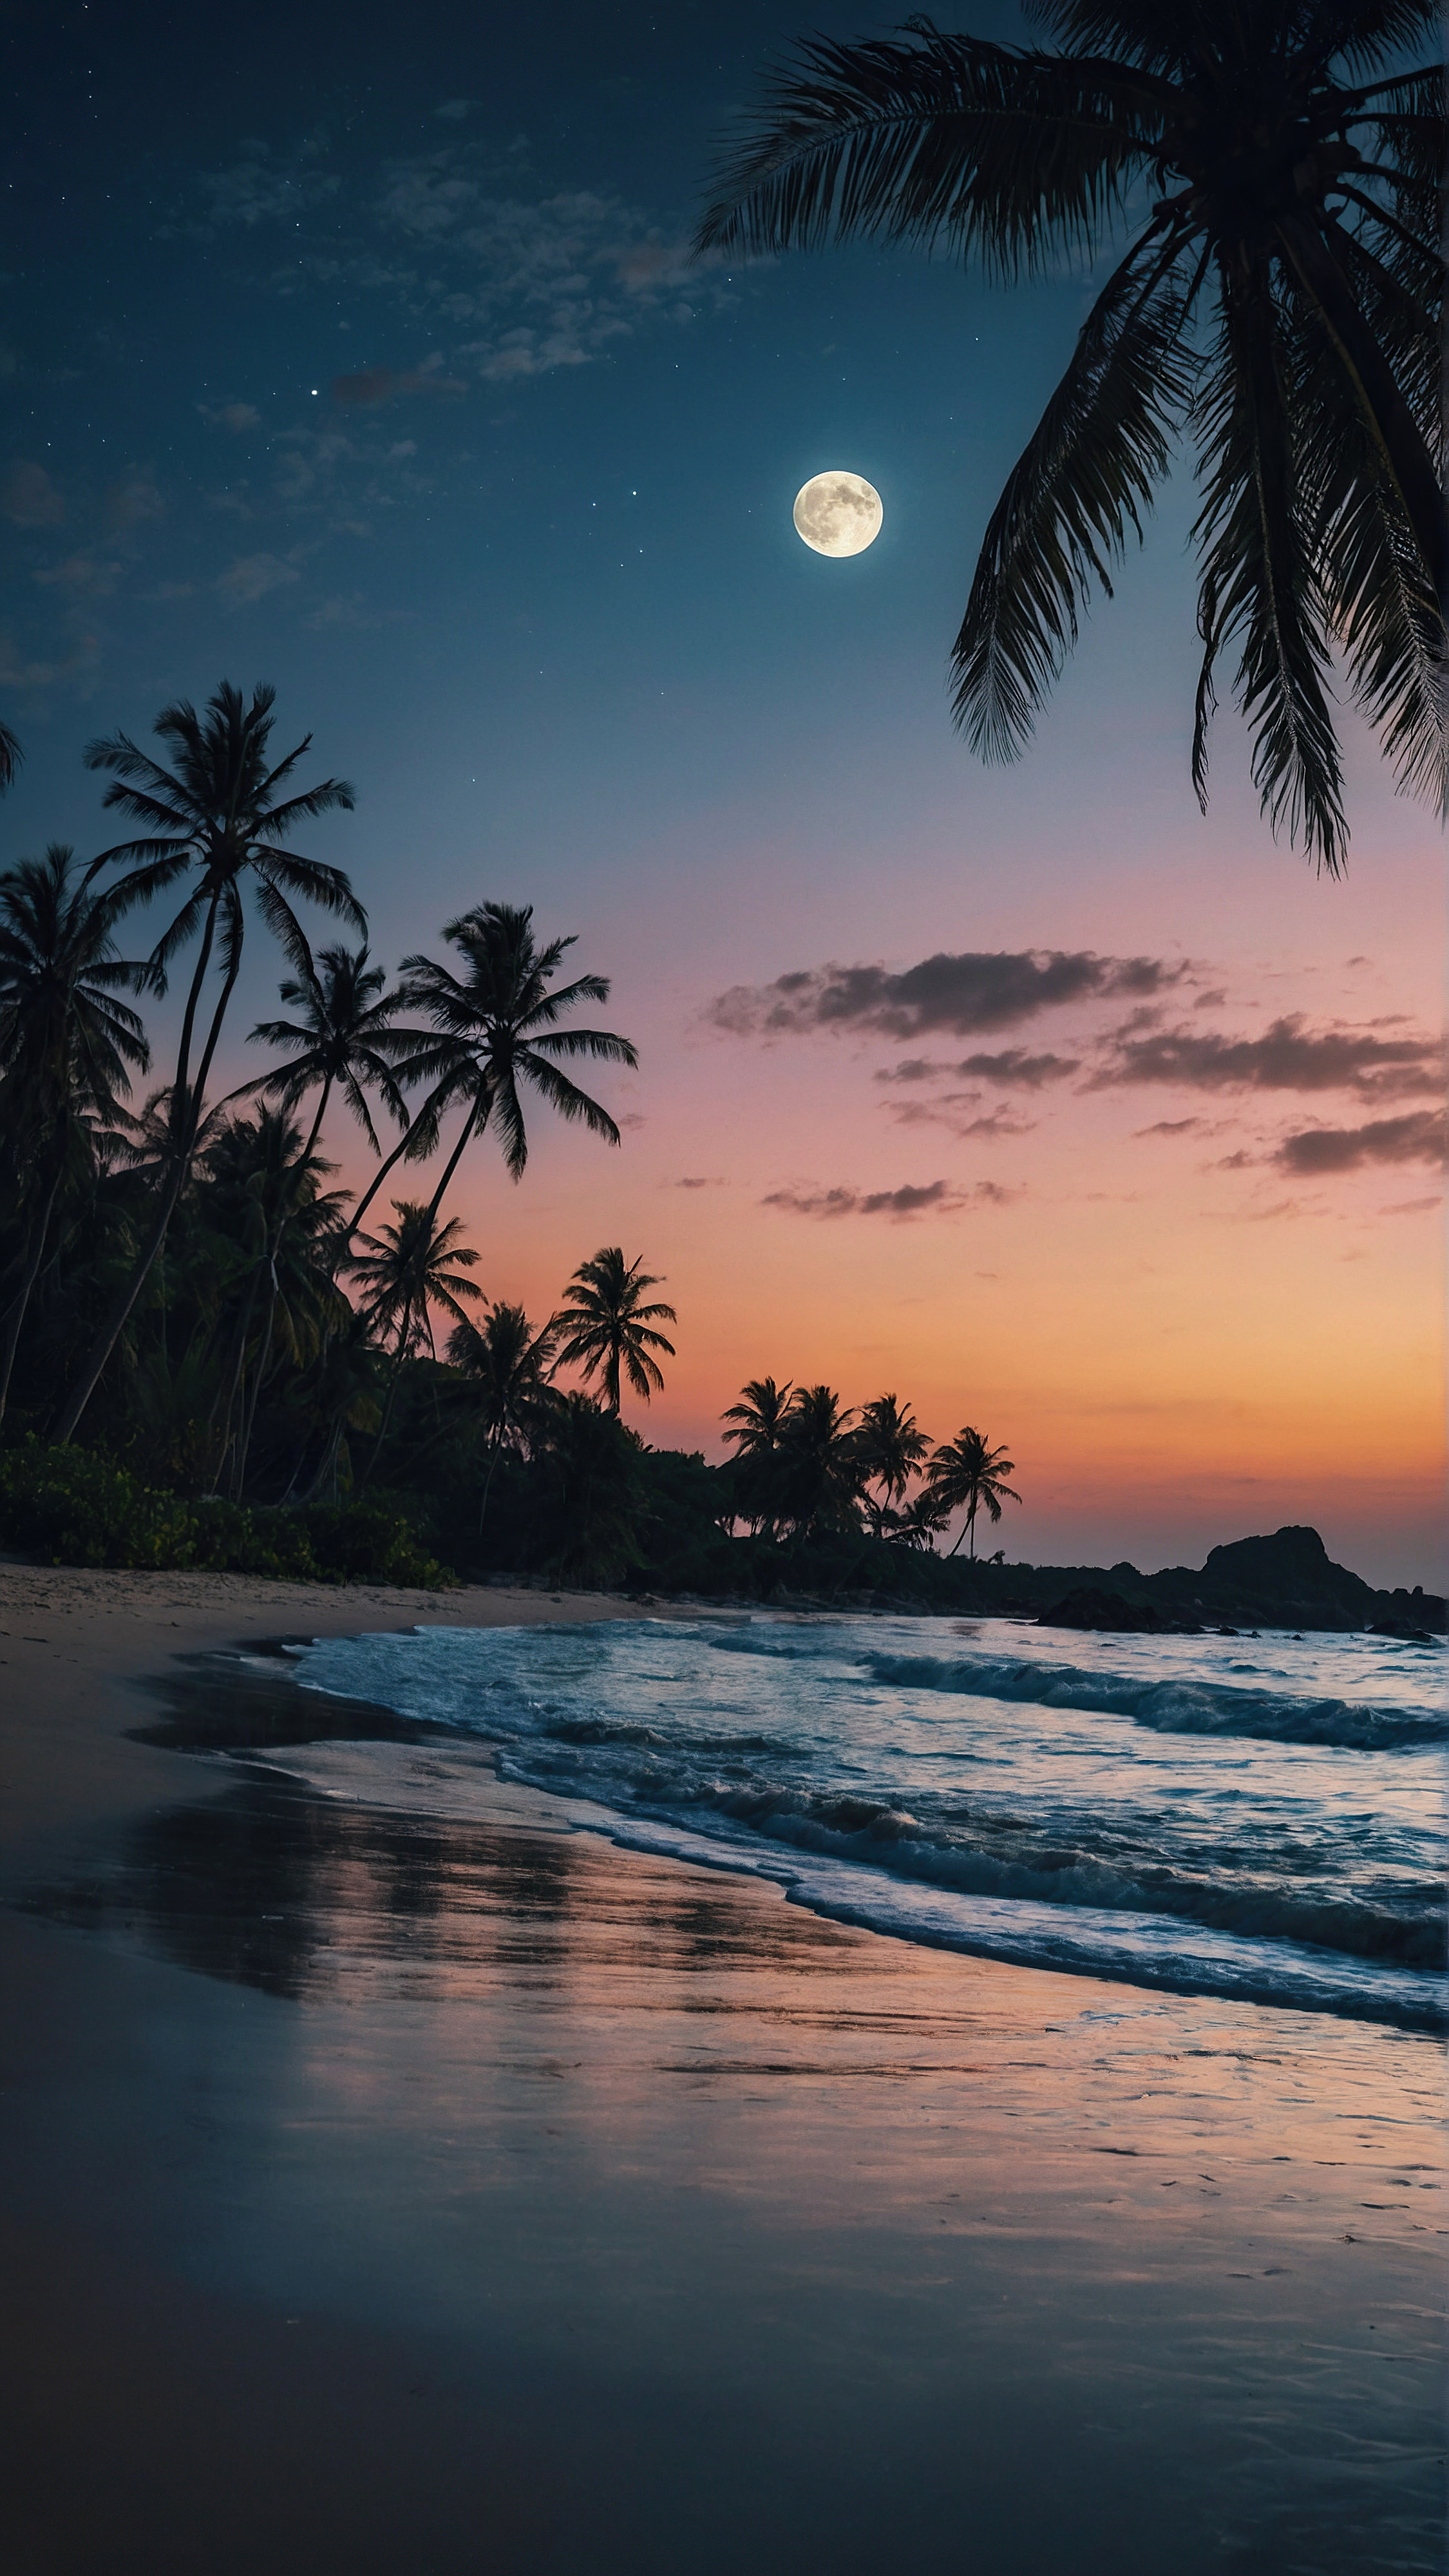 Discover the tropical charm of our iPhone wallpaper in 4K, where a large moon illuminates a mesmerizing beach scene at dusk, reflecting off the gently lapping waves and enhancing the silhouettes of palm trees in this serene landscape.